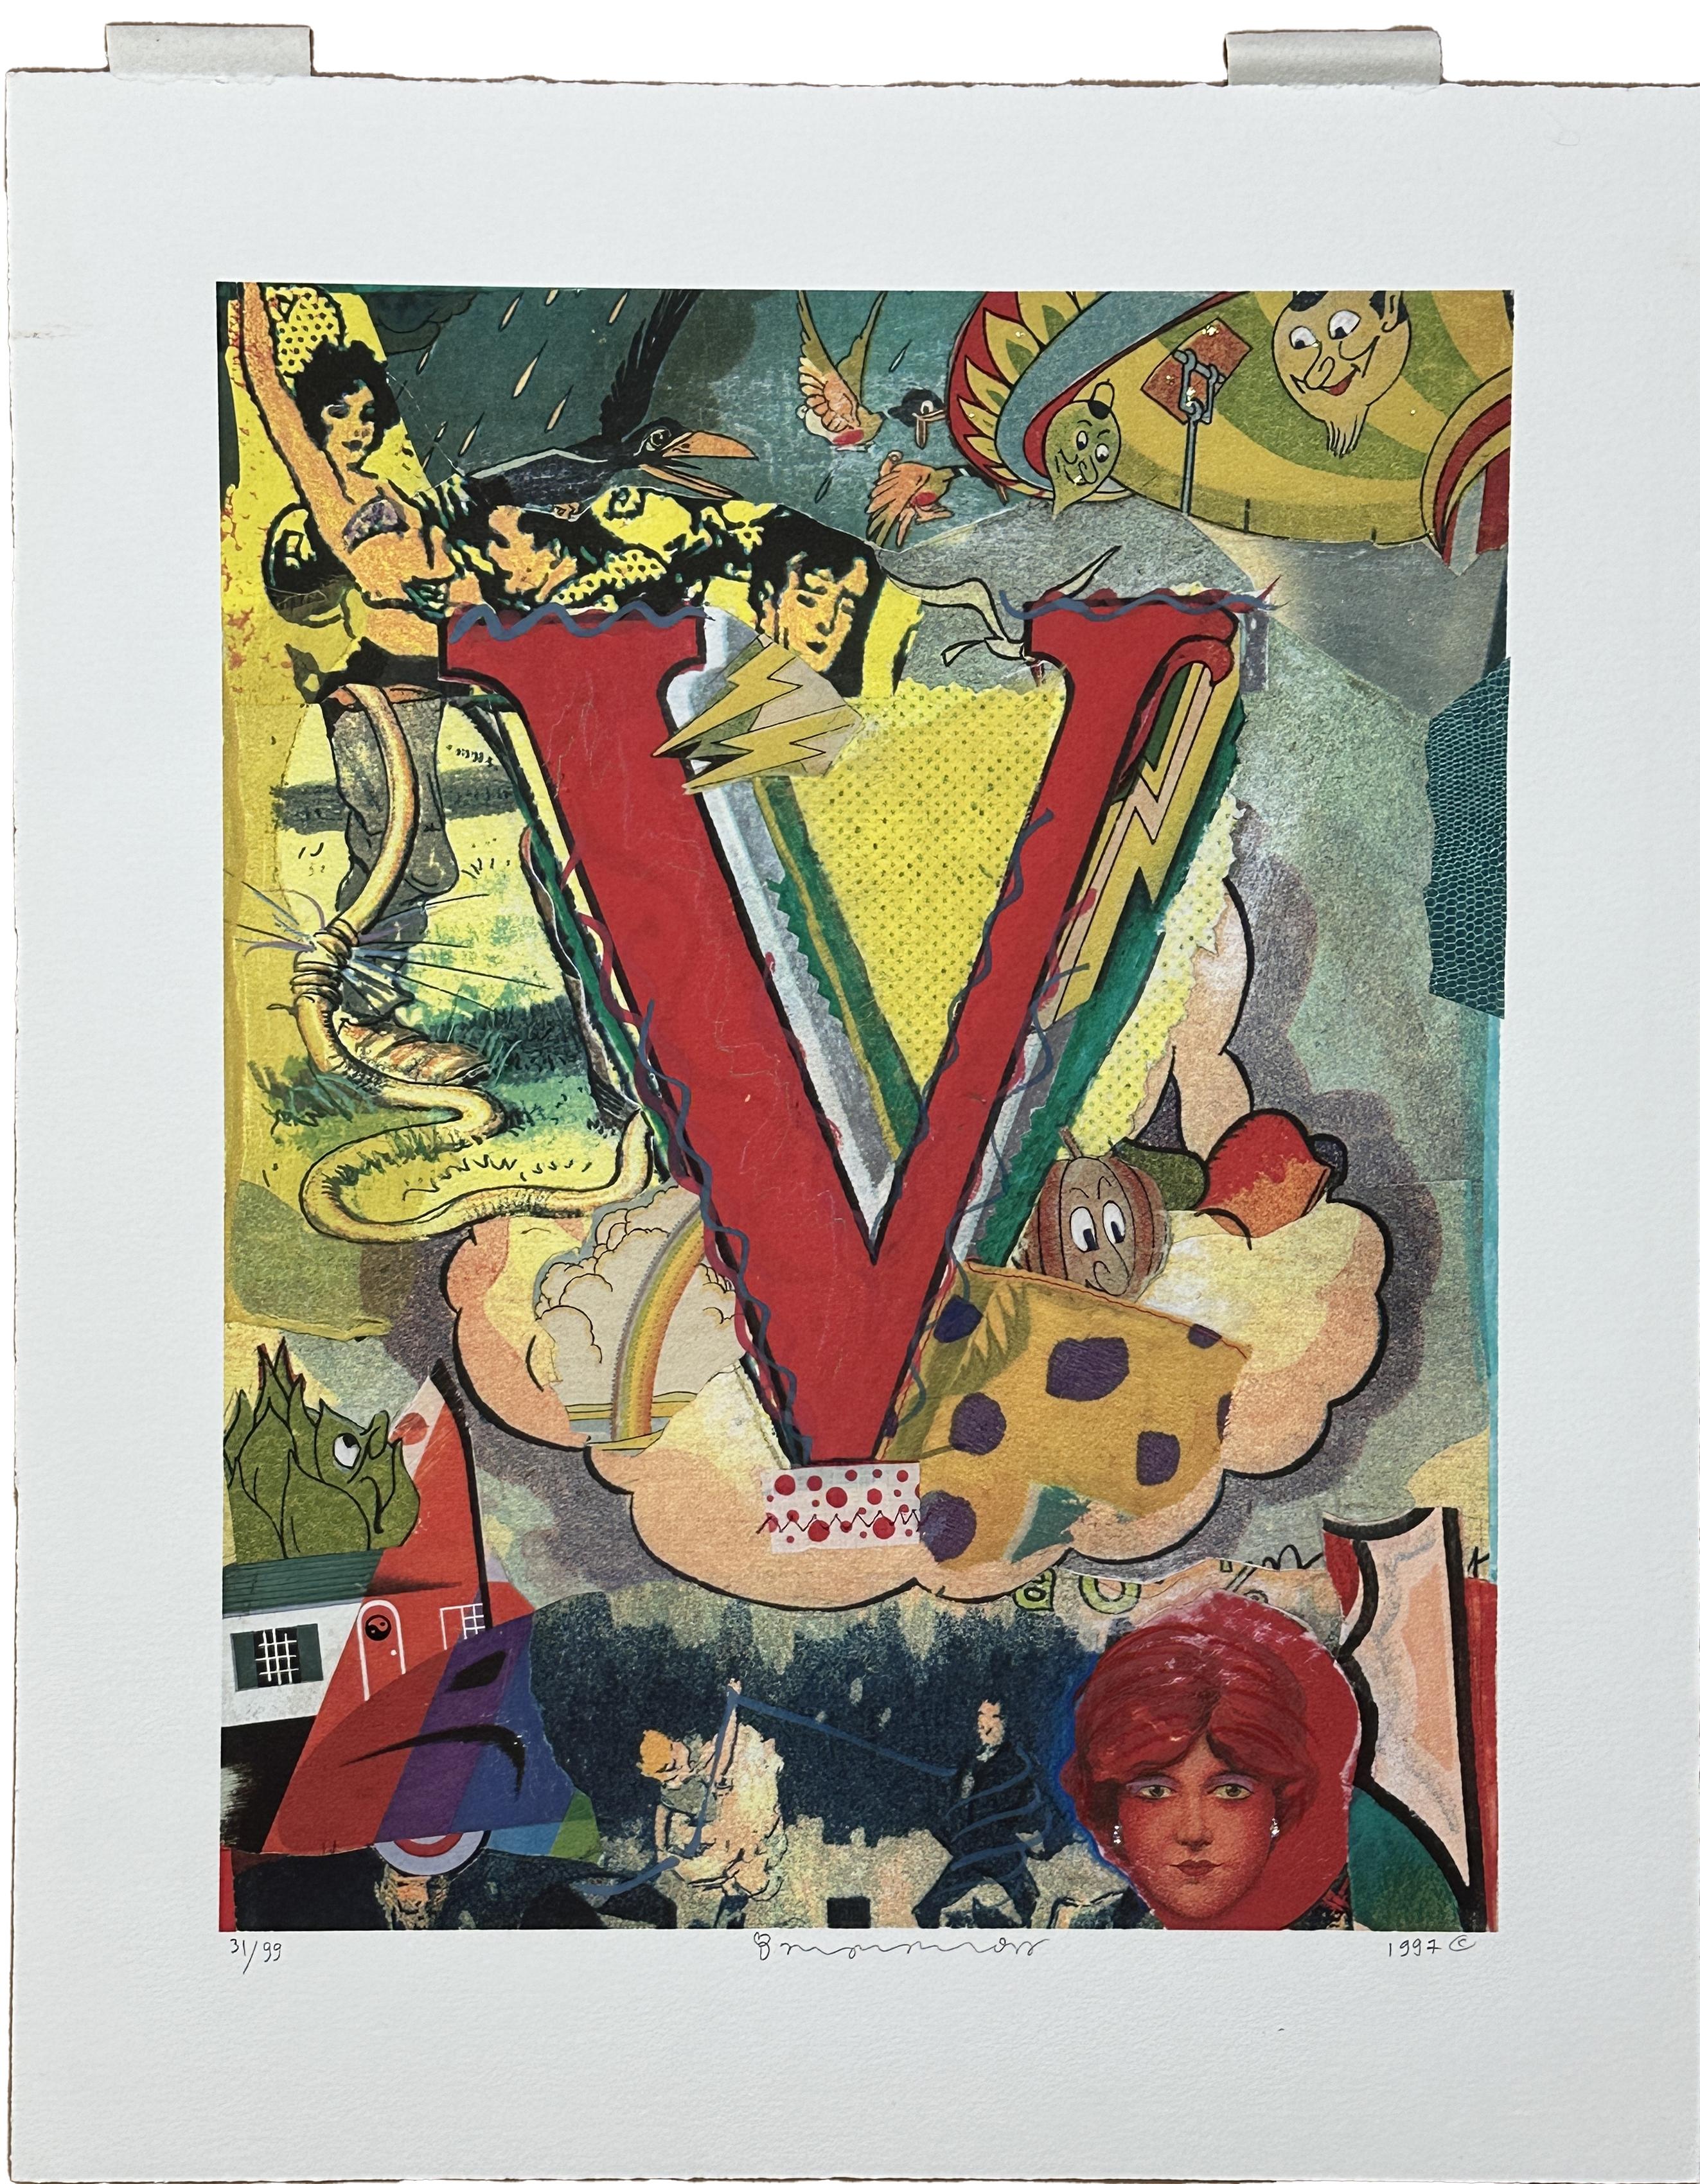 Bruce Helander
1997 - 1998
Love Letters
Four Signed Limited Edition Lithographs with Mixed Media Collage 

Each Lithograph is 21 x 17 in



